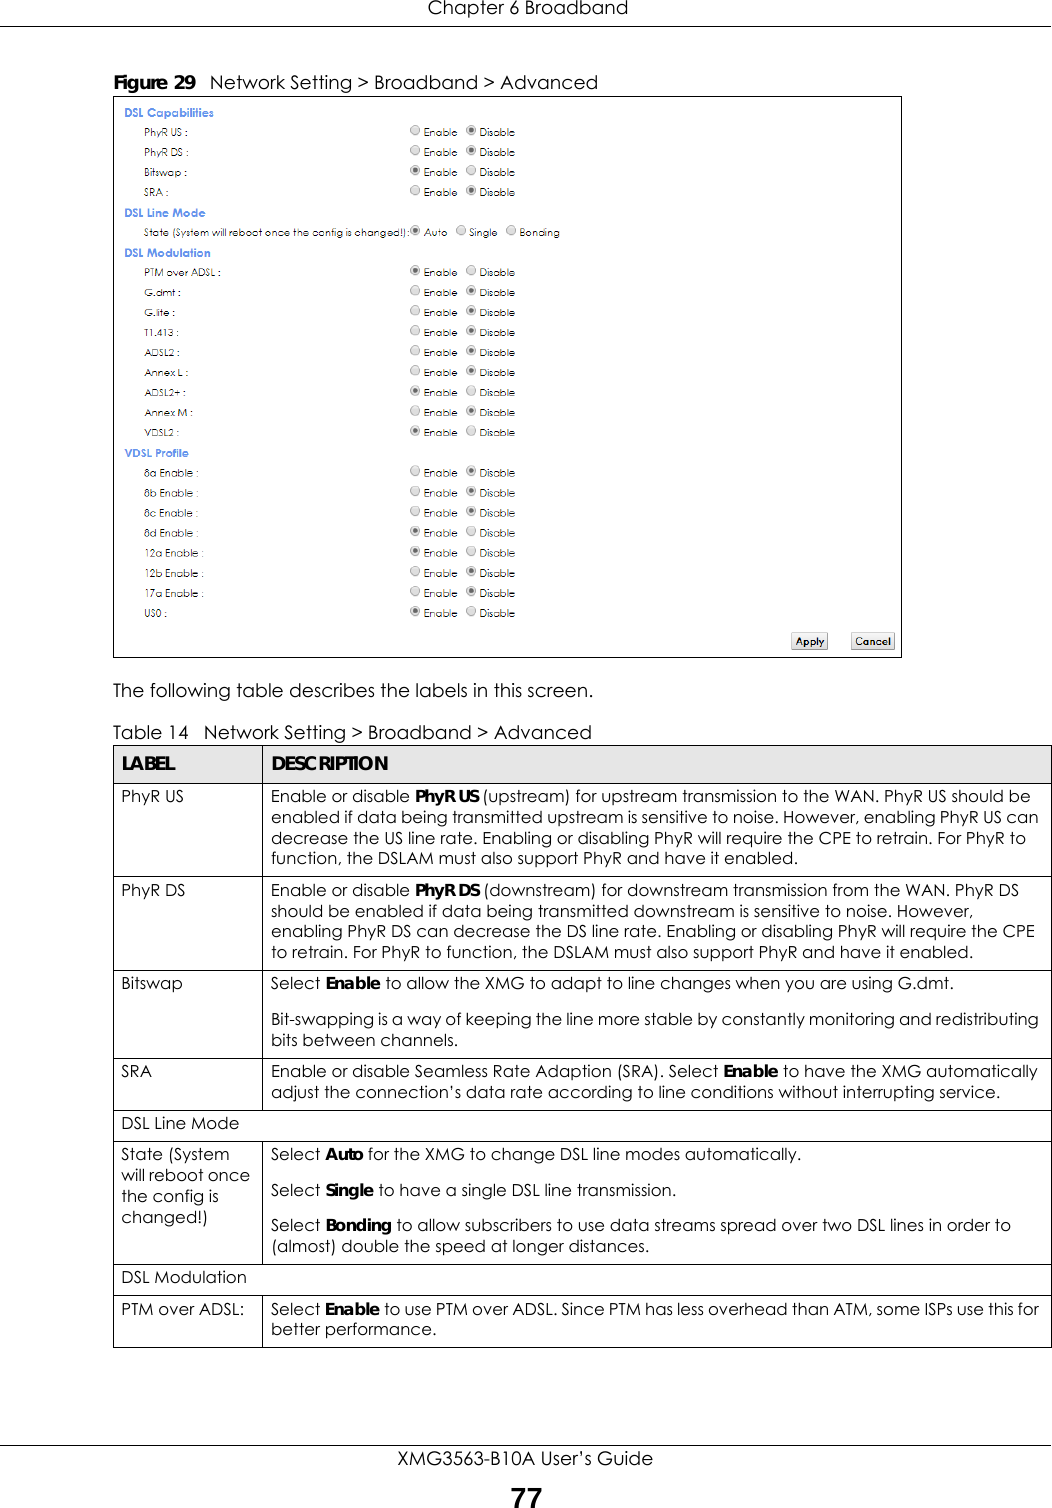  Chapter 6 BroadbandXMG3563-B10A User’s Guide77Figure 29   Network Setting &gt; Broadband &gt; Advanced The following table describes the labels in this screen.Table 14   Network Setting &gt; Broadband &gt; AdvancedLABEL DESCRIPTIONPhyR US Enable or disable PhyR US (upstream) for upstream transmission to the WAN. PhyR US should be enabled if data being transmitted upstream is sensitive to noise. However, enabling PhyR US can decrease the US line rate. Enabling or disabling PhyR will require the CPE to retrain. For PhyR to function, the DSLAM must also support PhyR and have it enabled.PhyR DS Enable or disable PhyR DS (downstream) for downstream transmission from the WAN. PhyR DS should be enabled if data being transmitted downstream is sensitive to noise. However, enabling PhyR DS can decrease the DS line rate. Enabling or disabling PhyR will require the CPE to retrain. For PhyR to function, the DSLAM must also support PhyR and have it enabled.Bitswap Select Enable to allow the XMG to adapt to line changes when you are using G.dmt.Bit-swapping is a way of keeping the line more stable by constantly monitoring and redistributing bits between channels.SRA Enable or disable Seamless Rate Adaption (SRA). Select Enable to have the XMG automatically adjust the connection’s data rate according to line conditions without interrupting service.DSL Line ModeState (System will reboot once the config is changed!)Select Auto for the XMG to change DSL line modes automatically.Select Single to have a single DSL line transmission. Select Bonding to allow subscribers to use data streams spread over two DSL lines in order to (almost) double the speed at longer distances.DSL ModulationPTM over ADSL: Select Enable to use PTM over ADSL. Since PTM has less overhead than ATM, some ISPs use this for better performance.